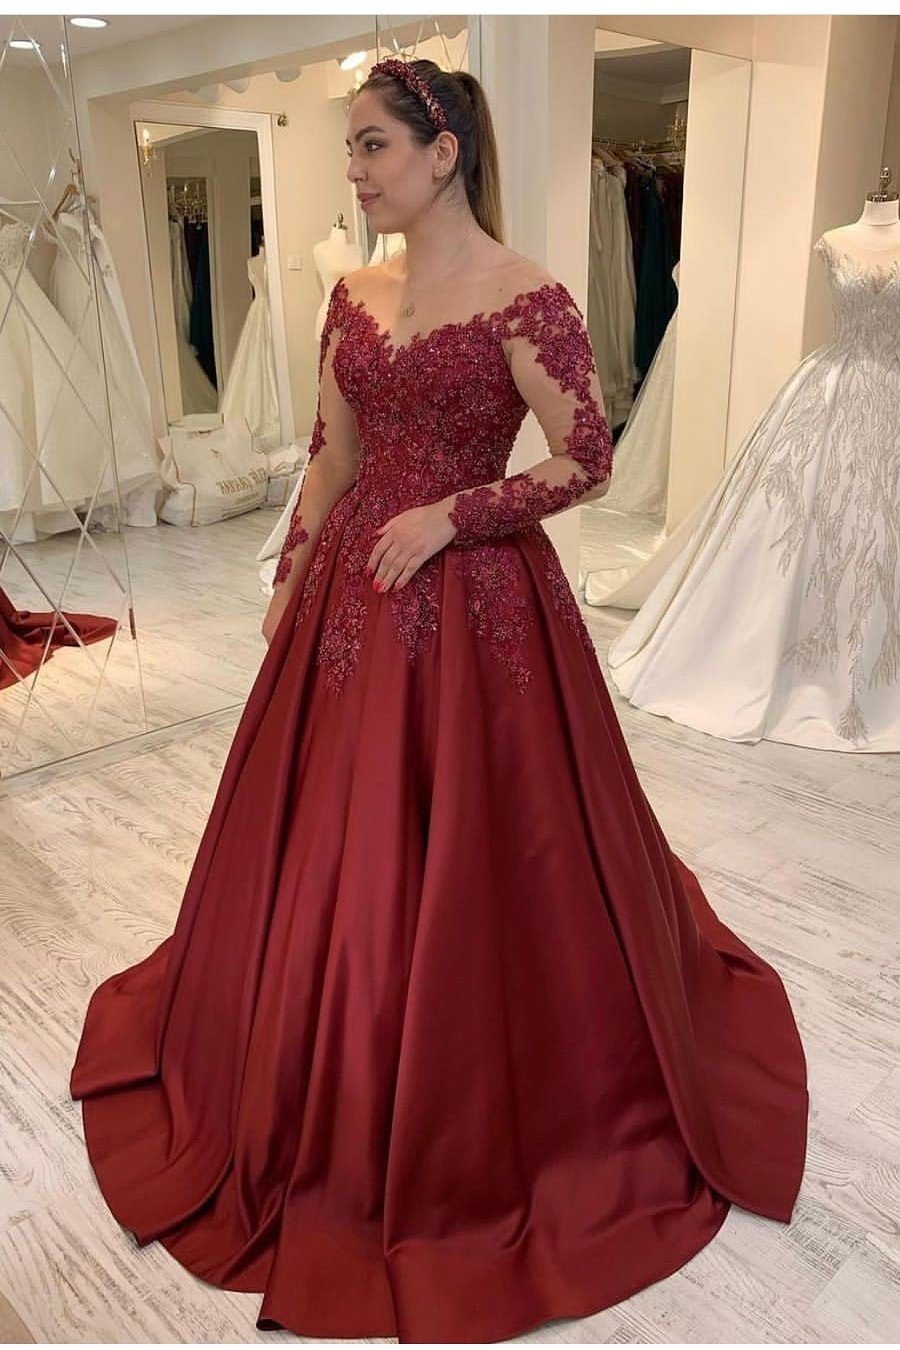 Satin Lace Burgundy Evening Gown with Illusion Sleeves